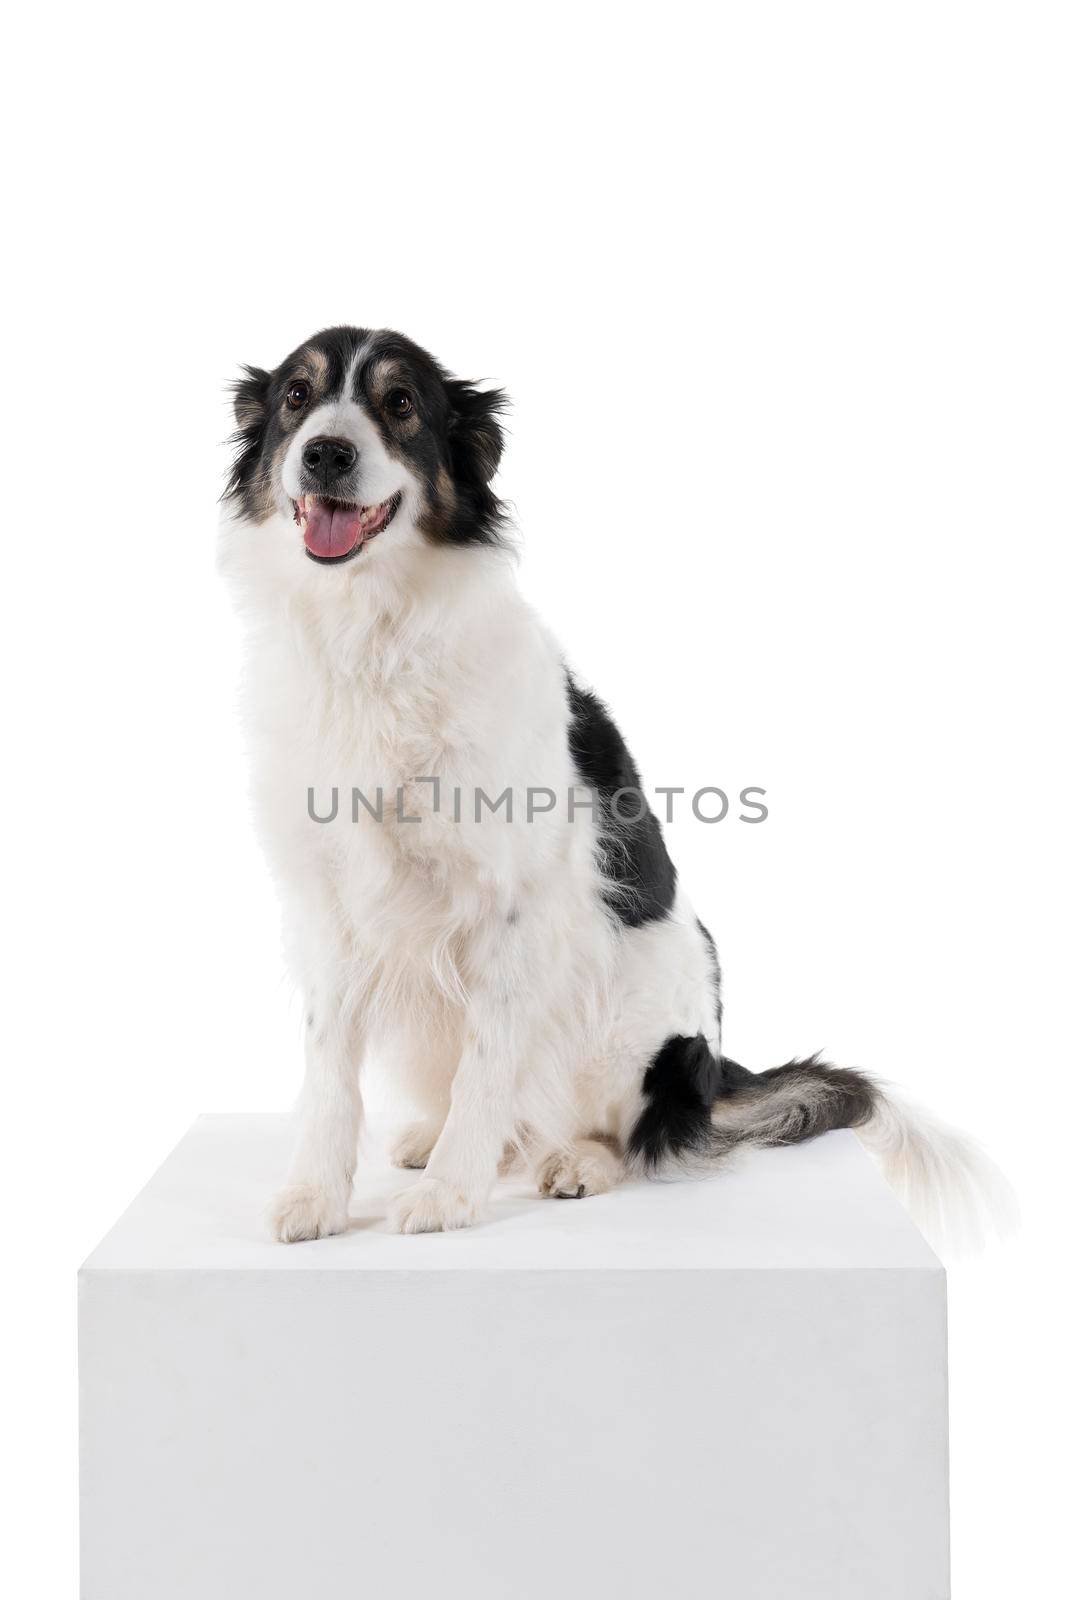 Black and white Australian Shepherd dog sitting isolated in white background  looking front view